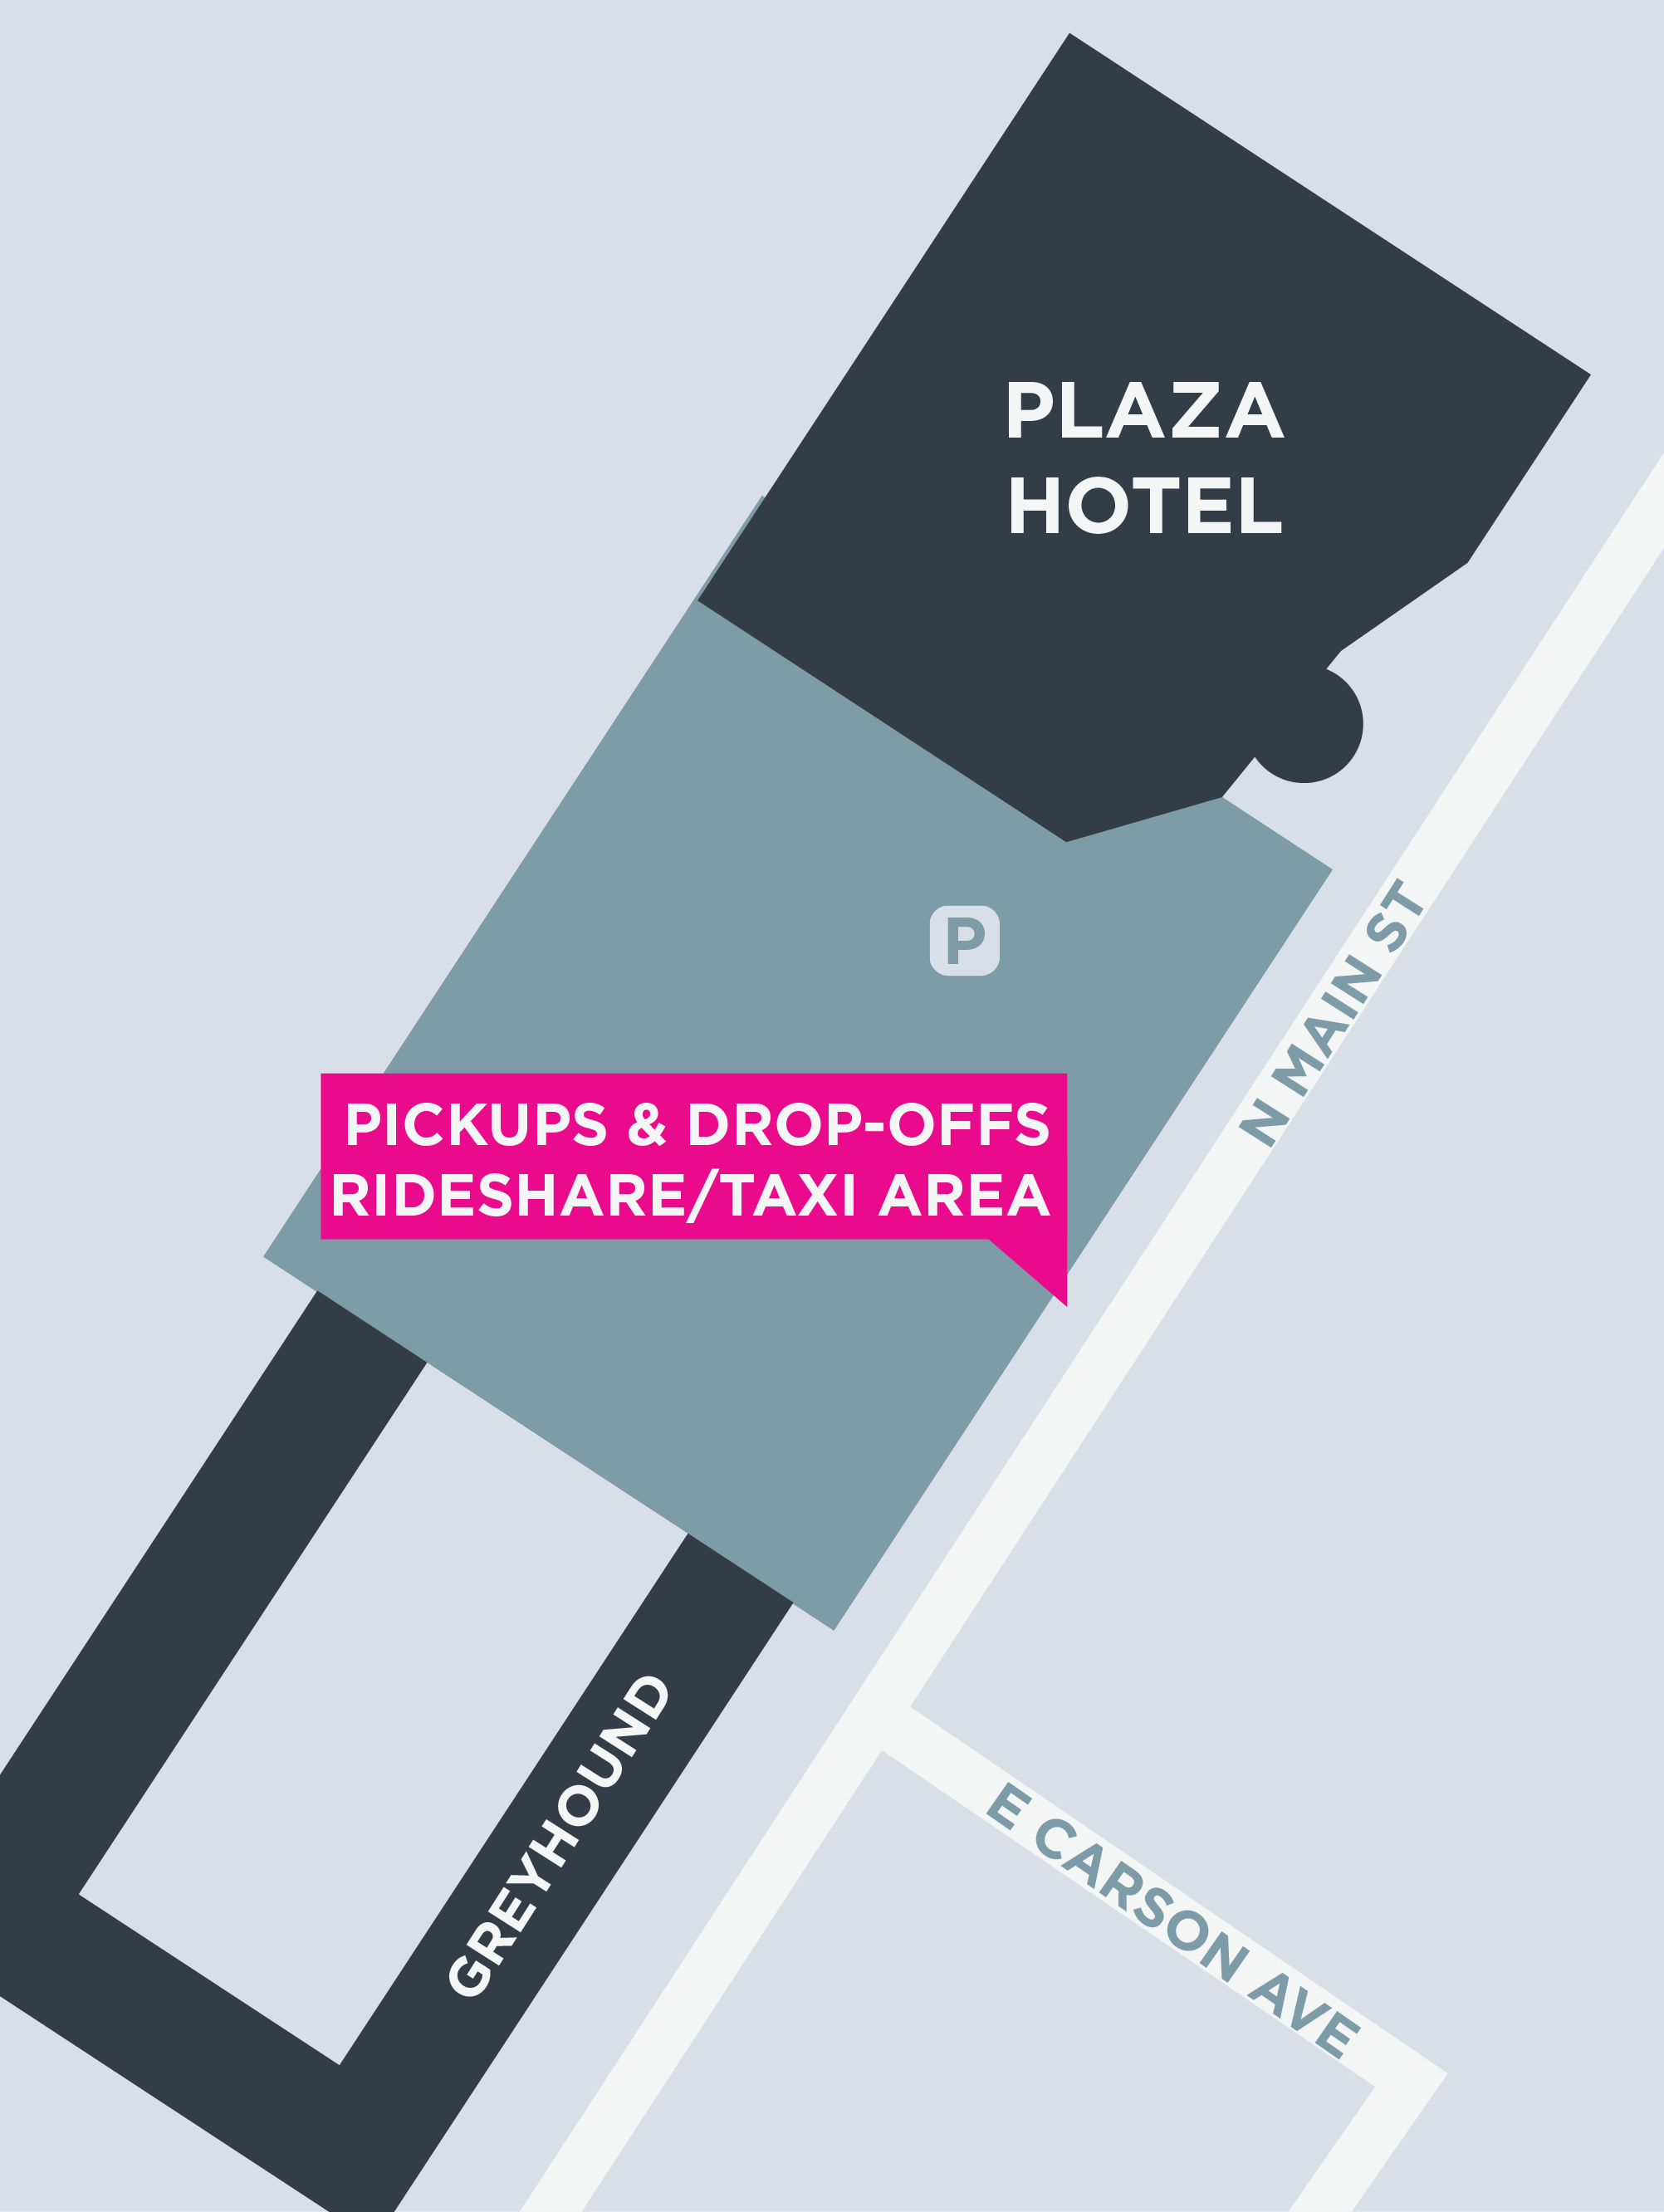 Map of the passenger pickup and drop-offs area at the Plaza Hotel in Las Vegas.